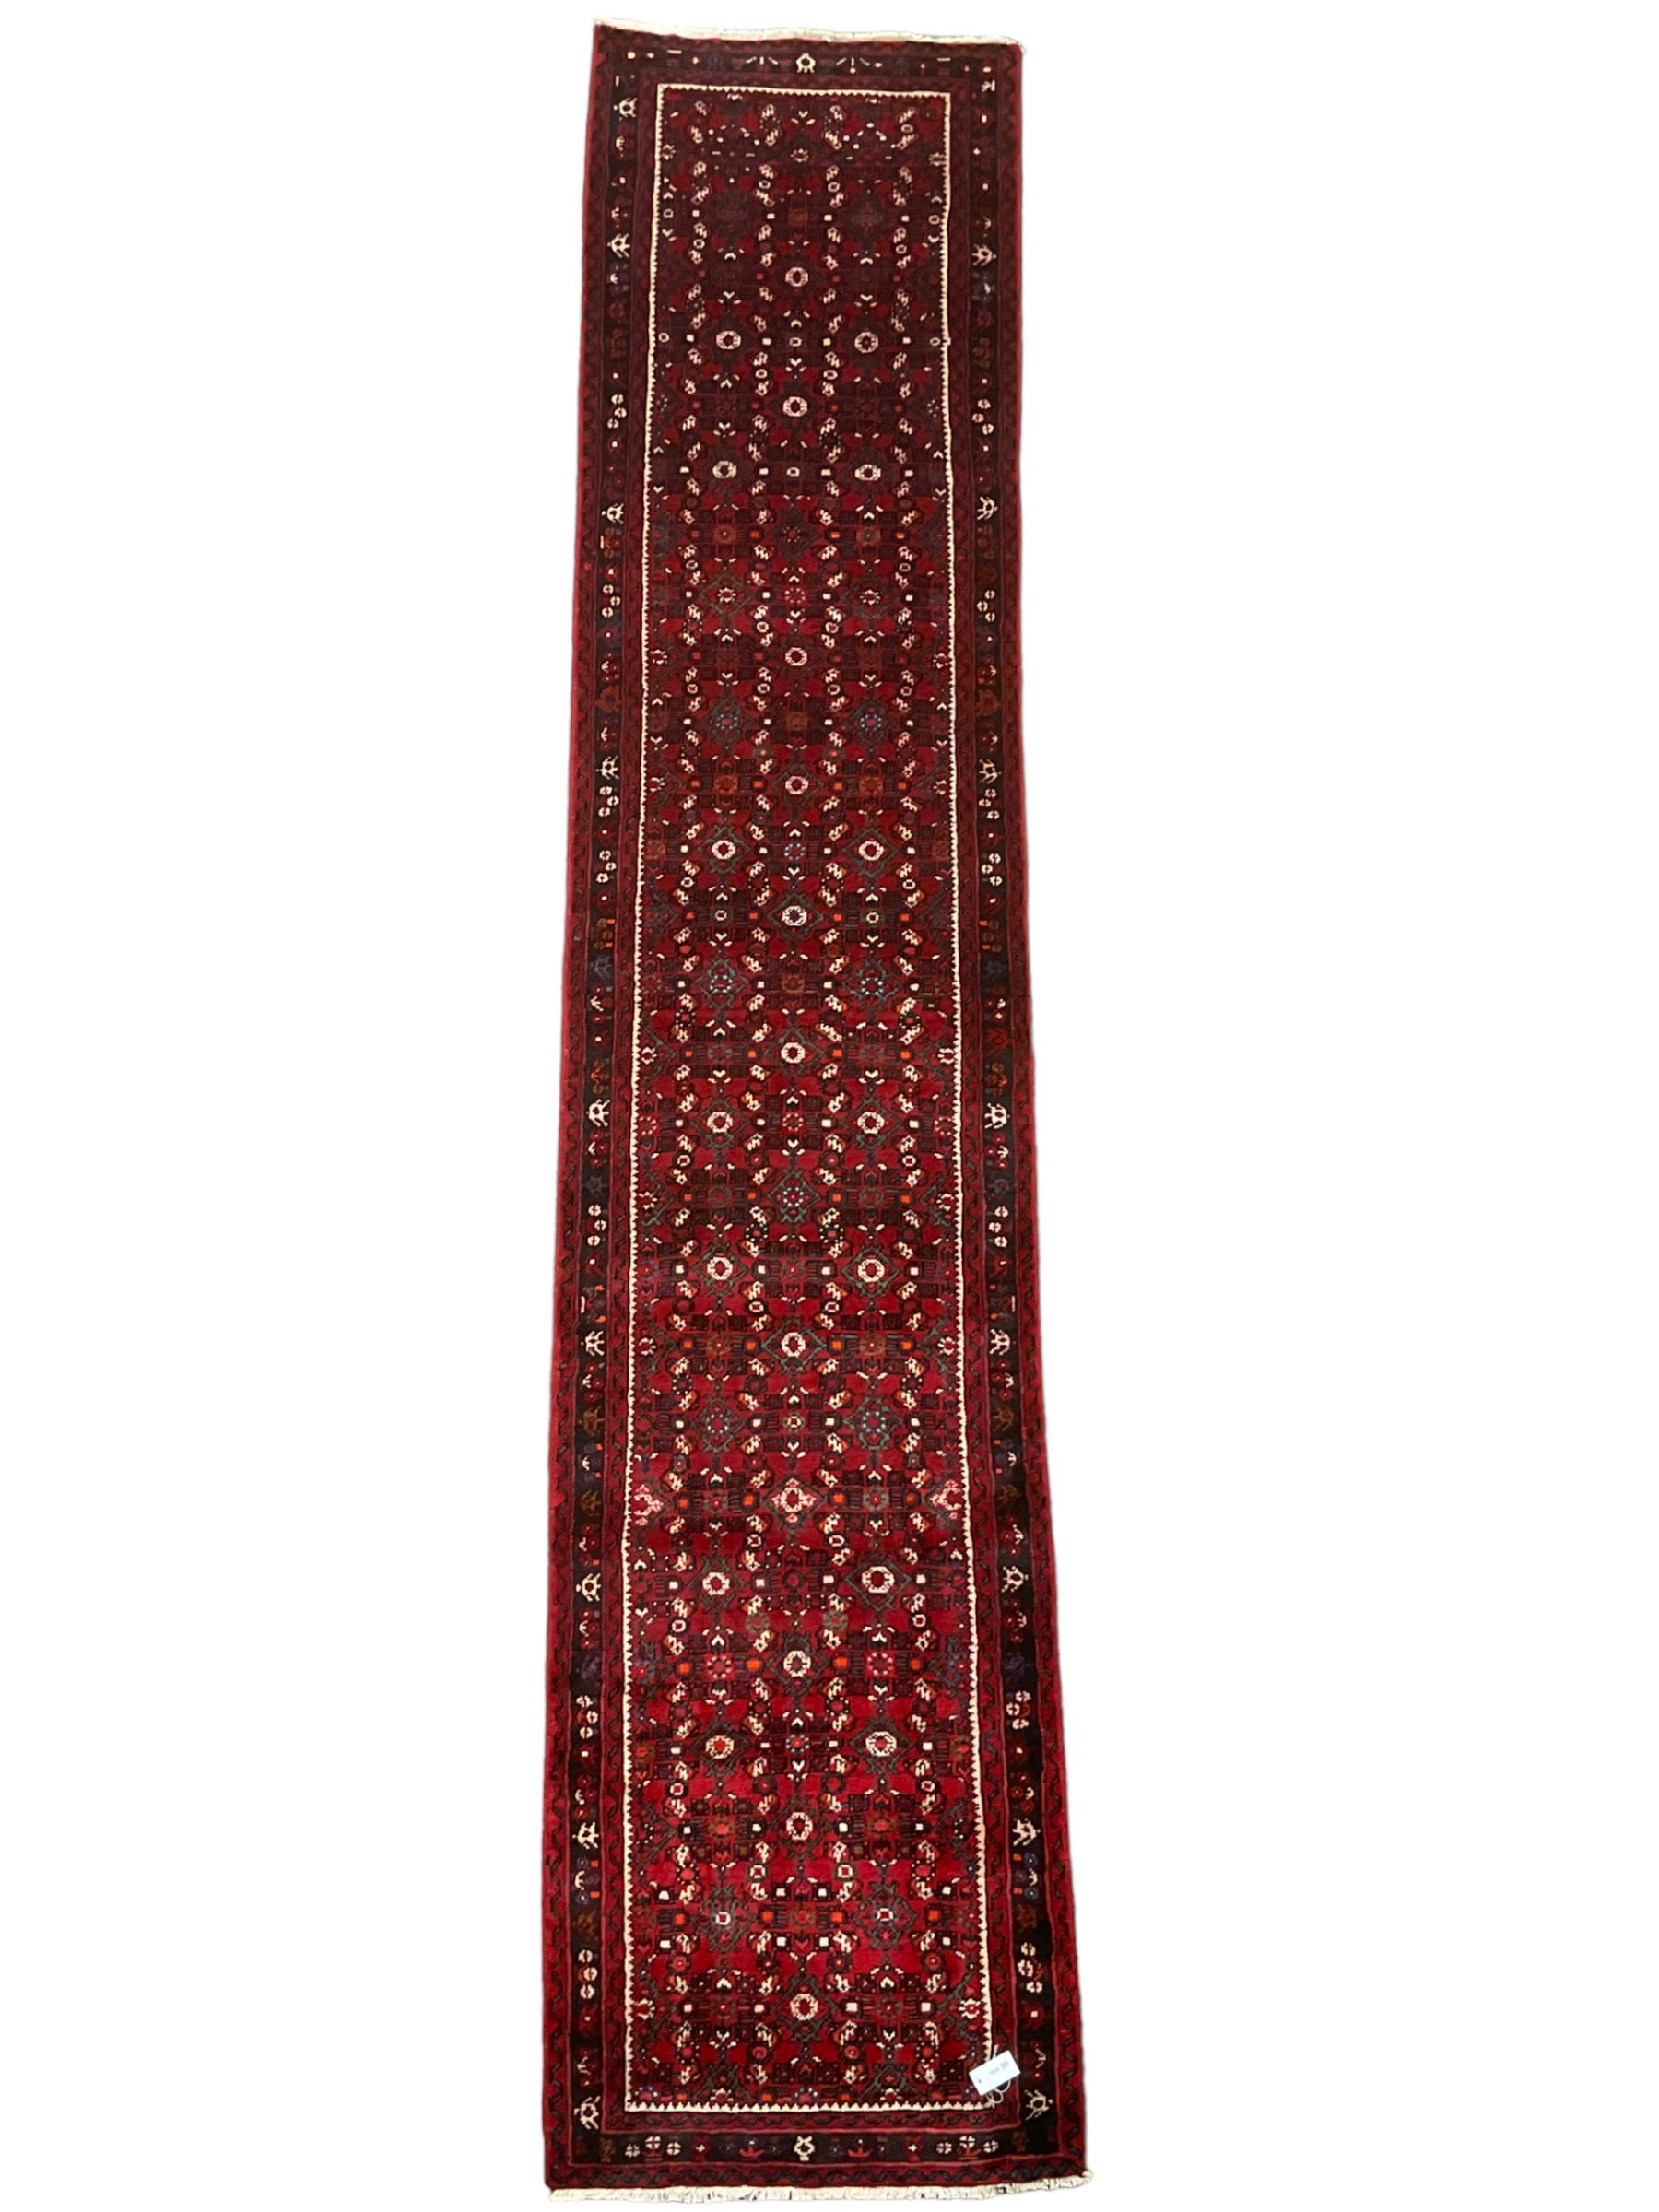 North West Persian Malayer runner - Image 2 of 7